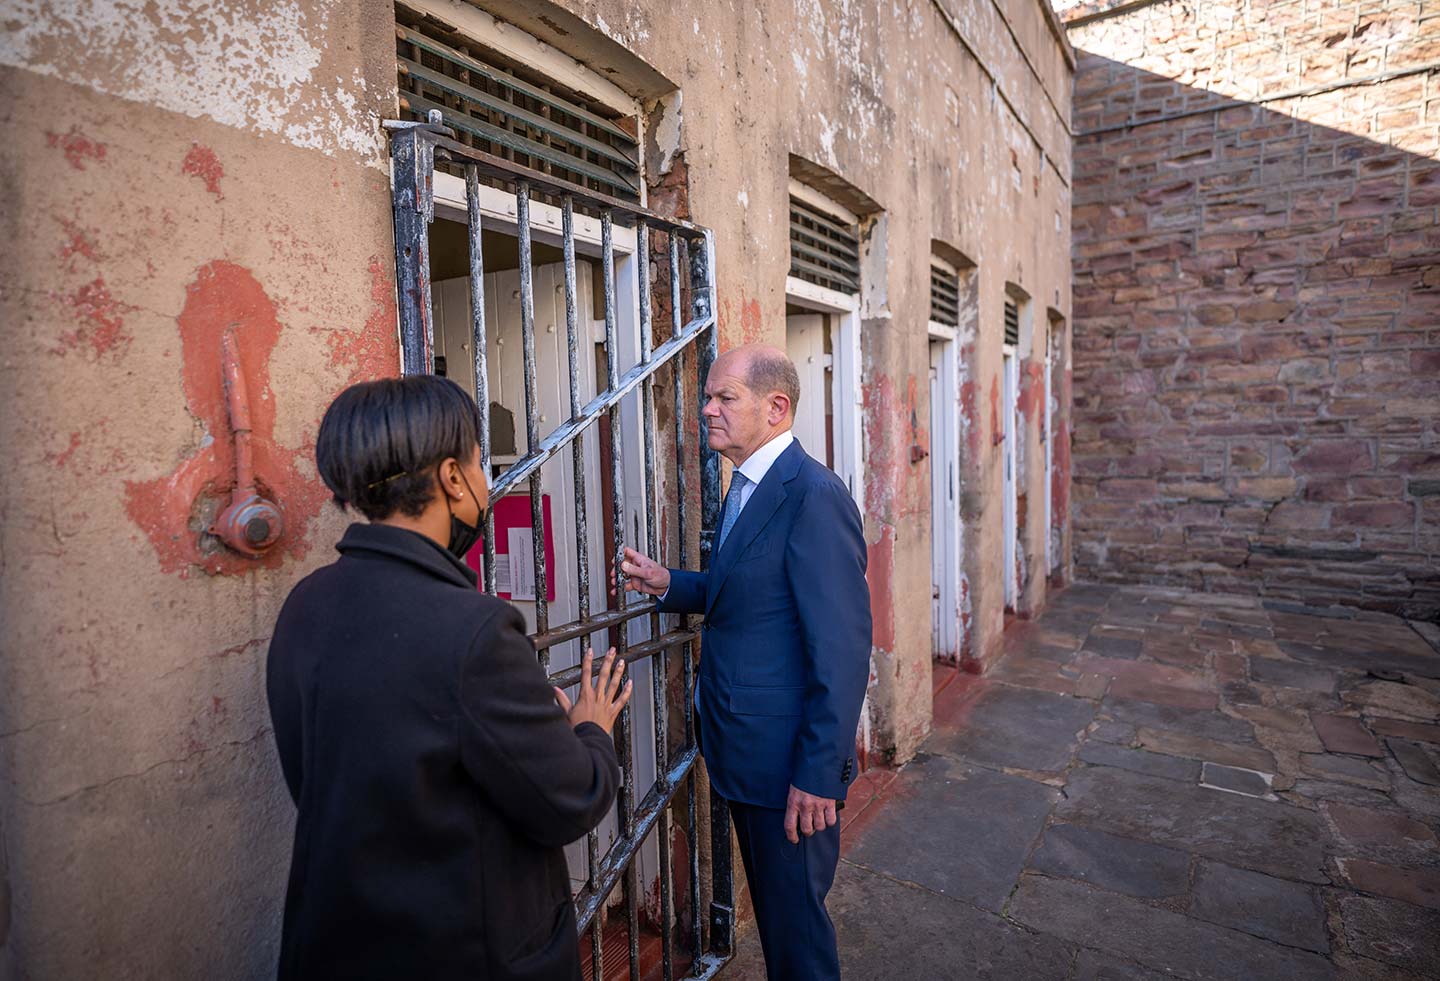 German Chancellor Olaf Scholz, guided by Pearl Gugulethu, visits the former “Number Four” prison, where numerous political prisoners were also incarcerated during apartheid in South Africa.